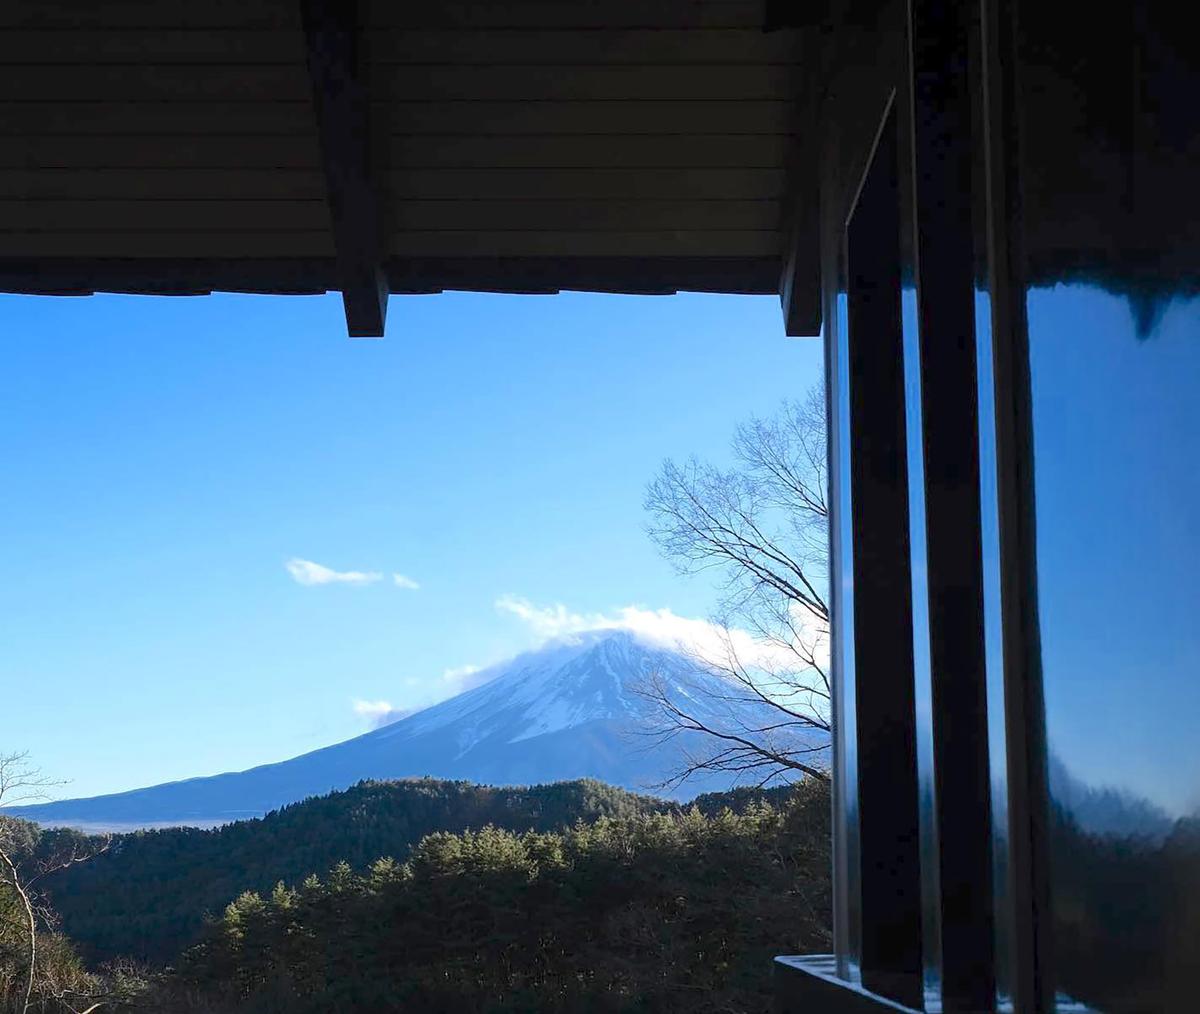 A view of Mt. Fuji seen from the kominka, now called Chair Laboratory, in Yamanashi Prefecture. (Courtesy of <a href="https://www.youtube.com/@dylaniwakuni">Dylan Iwanuki</a>)